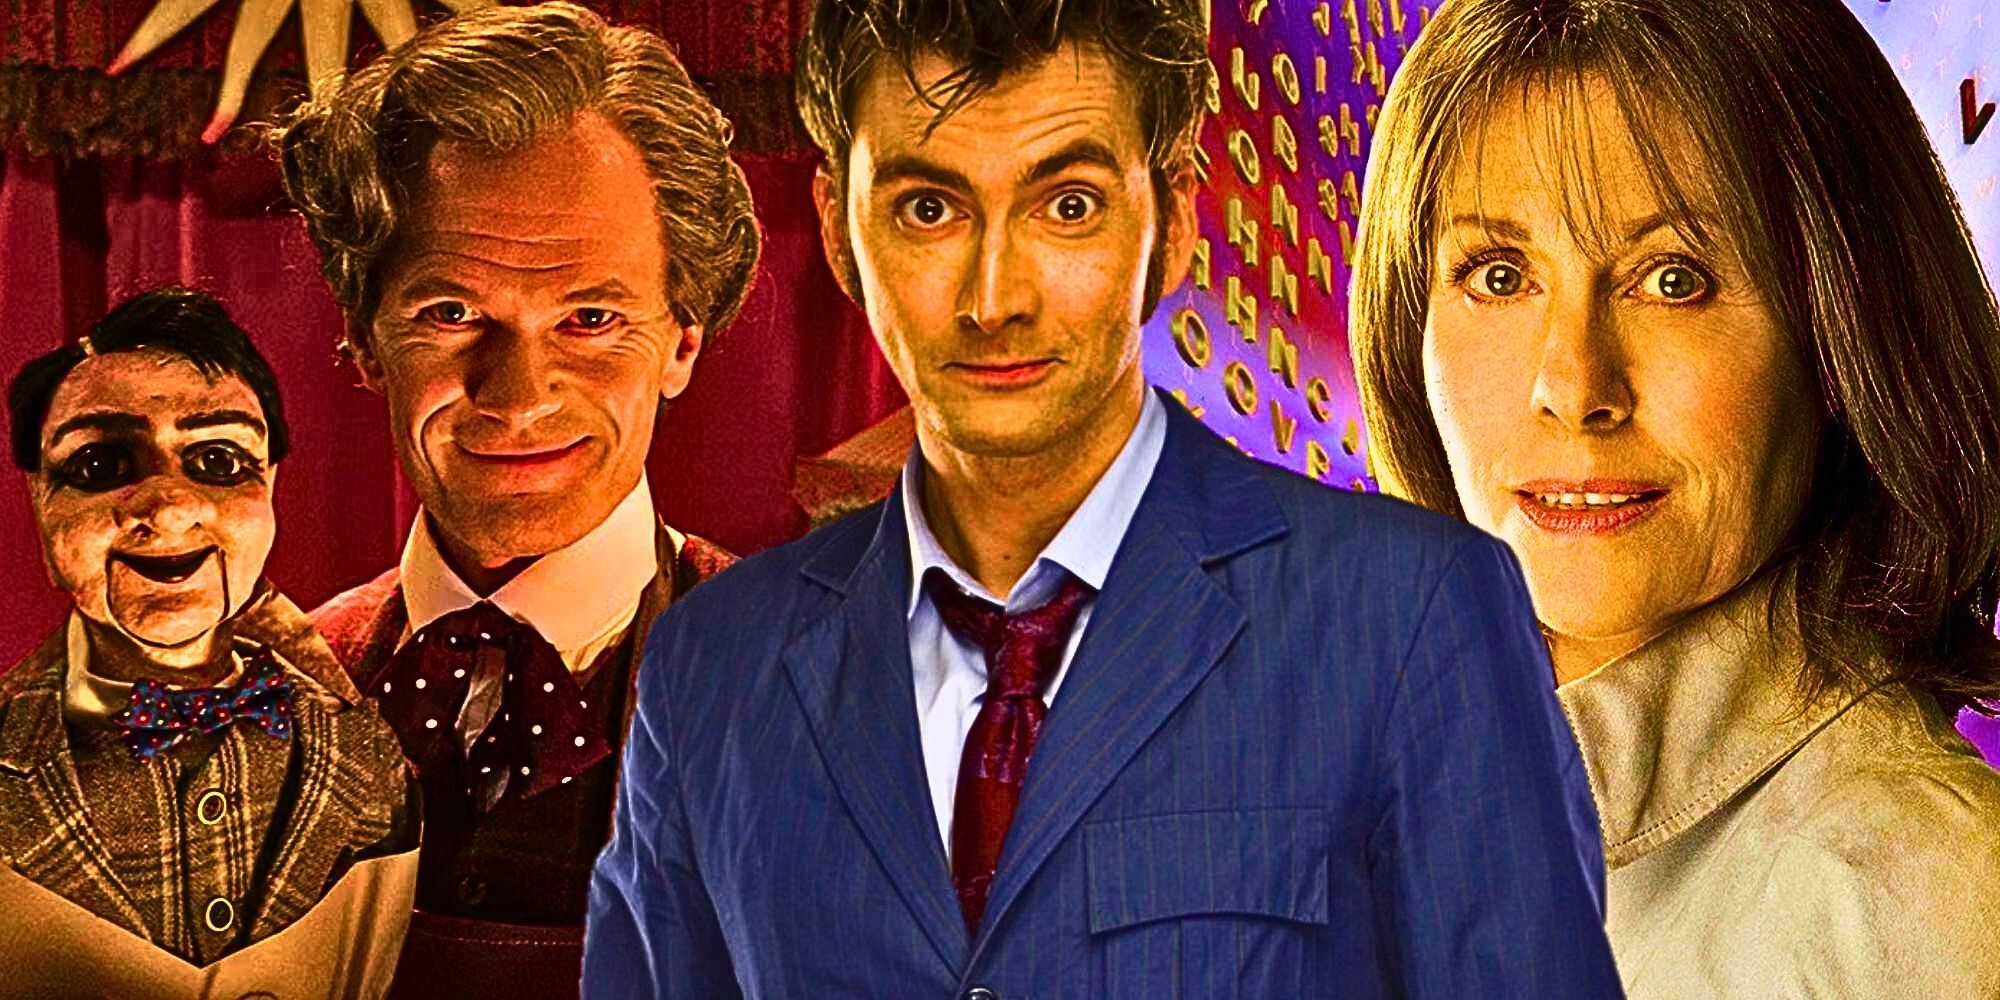 A custom image of Neil Patrick Harris as the Toymaker, David Tennant's Tenth Doctor, and Elisabeth Sladen as Sarah Jane Smith